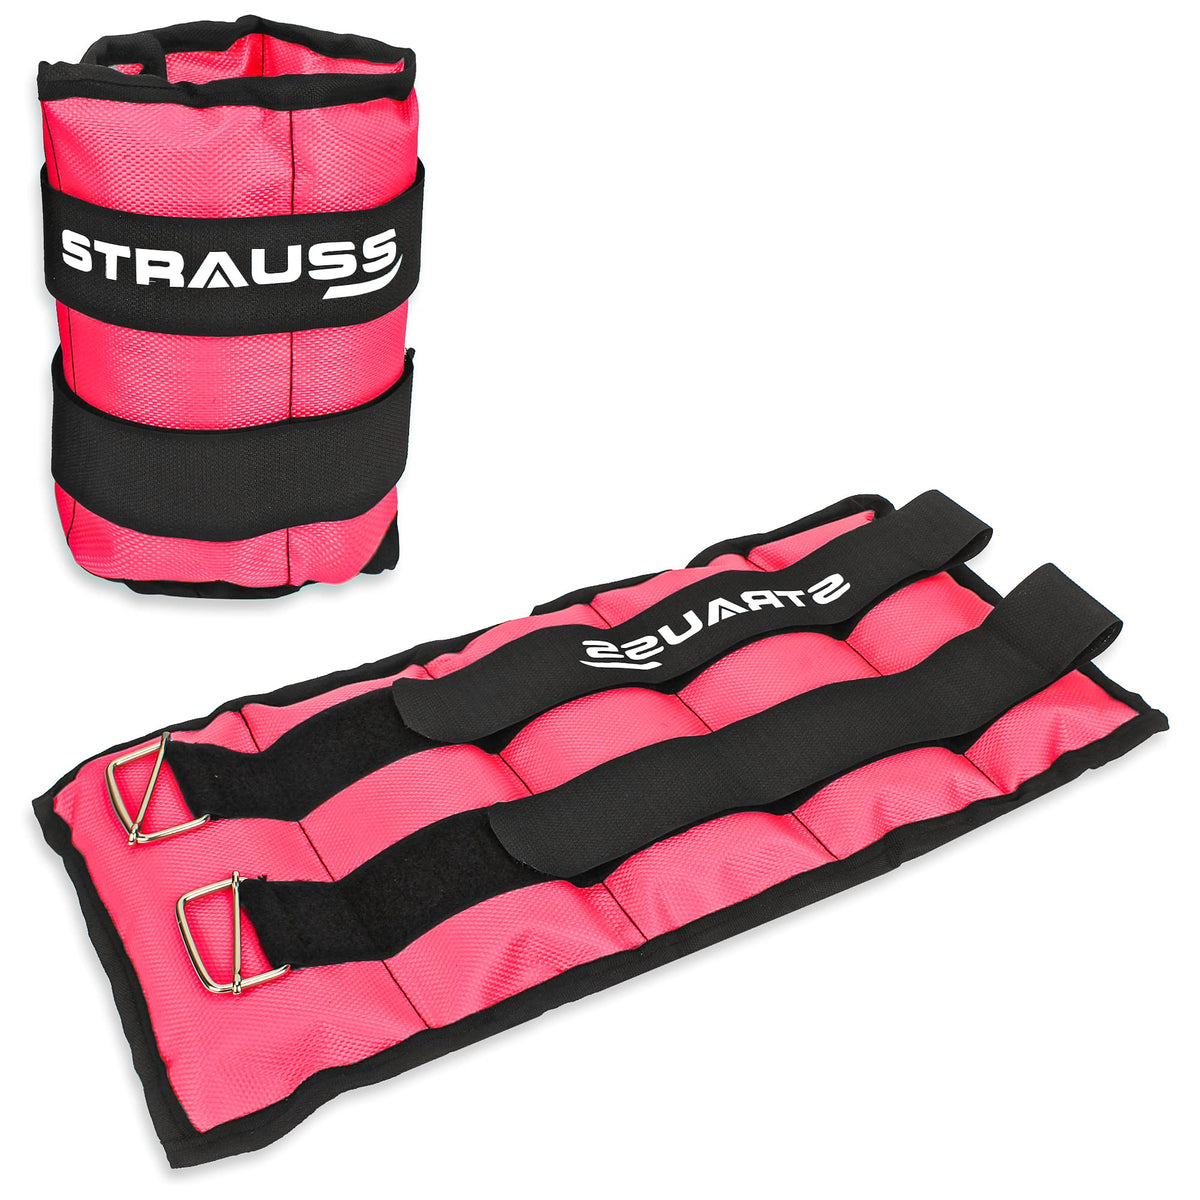 Strauss Ankle Weight, 5 Kg (Each), Pair, (Pink)